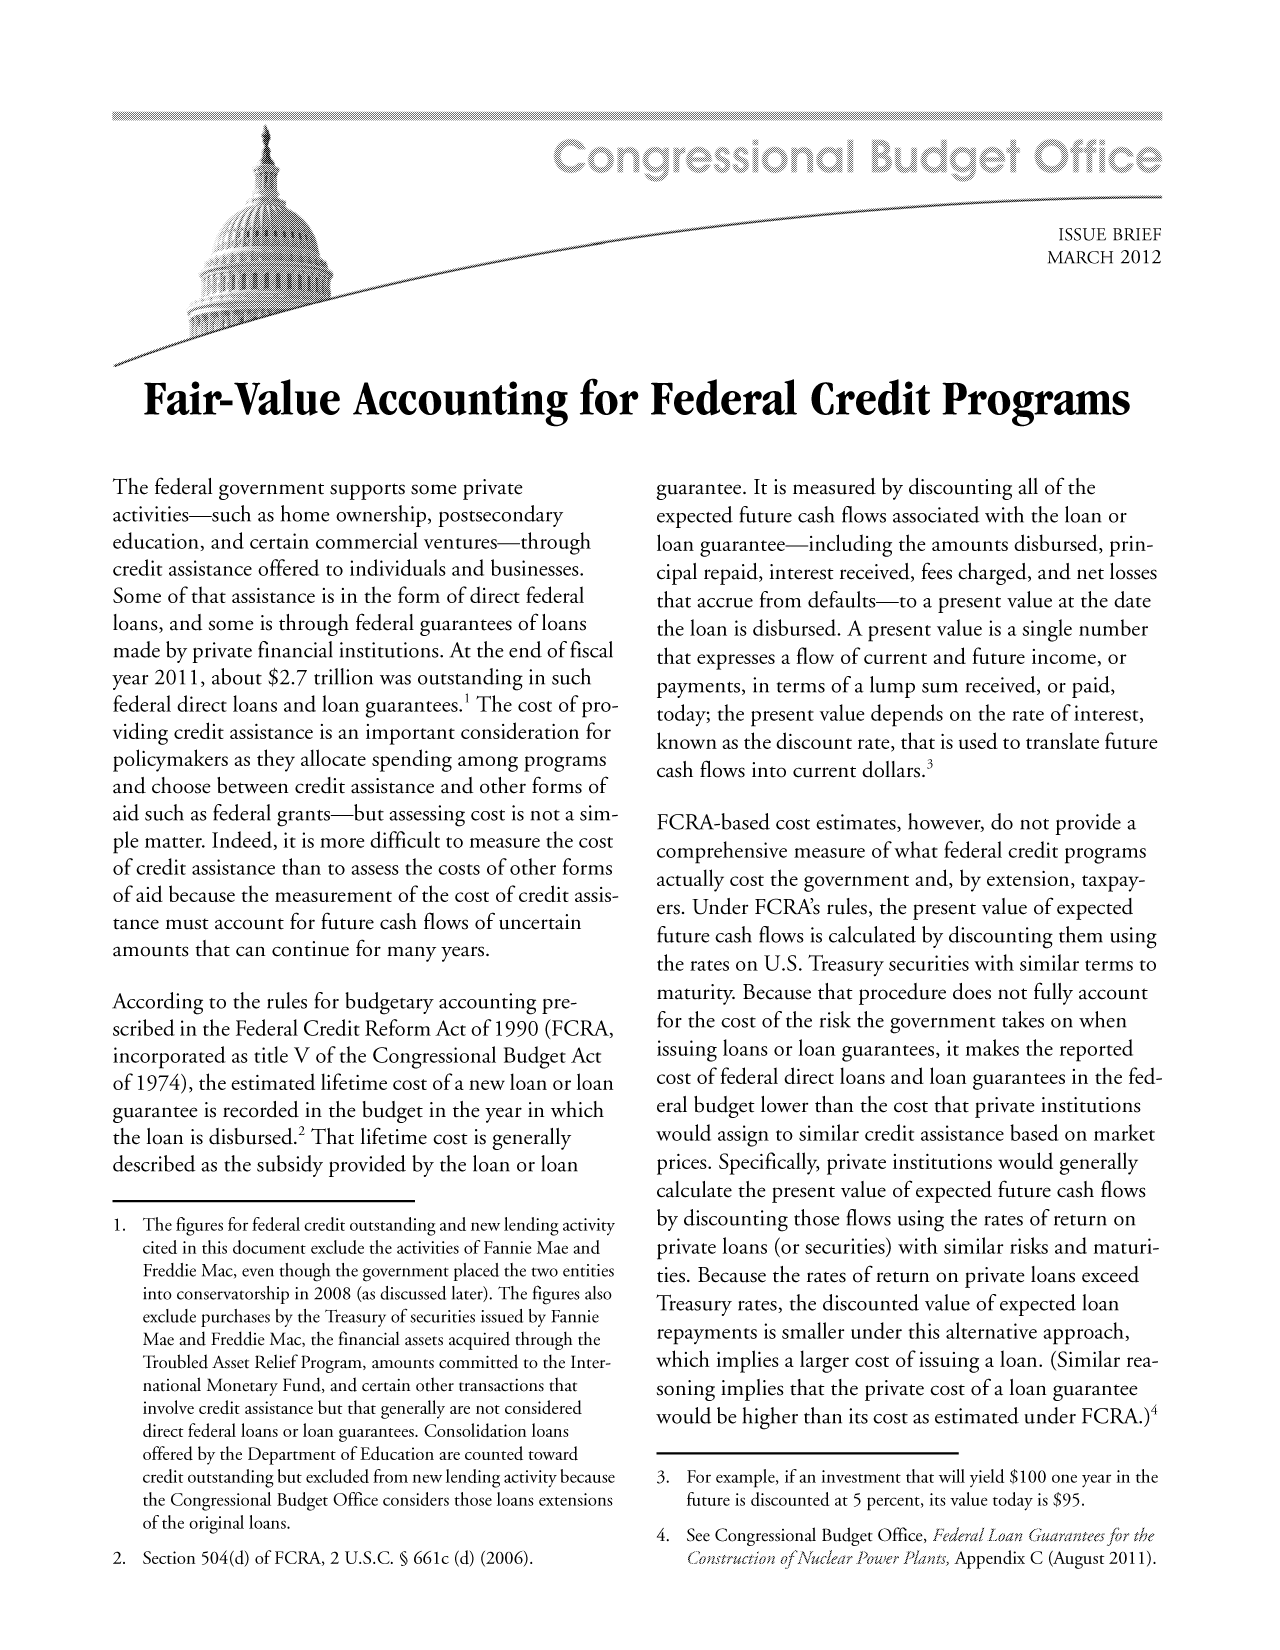 handle is hein.congrec/cbo10662 and id is 1 raw text is: ISSUE BRIEF
MARCH 2012
Fair-Value Accounting for Federal Credit Programs

The federal government supports some private
activities-such as home ownership, postsecondary
education, and certain commercial ventures-through
credit assistance offered to individuals and businesses.
Some of that assistance is in the form of direct federal
loans, and some is through federal guarantees of loans
made by private financial institutions. At the end of fiscal
year 2011, about $2.7 trillion was outstanding in such
federal direct loans and loan guarantees.' The cost of pro-
viding credit assistance is an important consideration for
policymakers as they allocate spending among programs
and choose between credit assistance and other forms of
aid such as federal grants-but assessing cost is not a sim-
ple matter. Indeed, it is more difficult to measure the cost
of credit assistance than to assess the costs of other forms
of aid because the measurement of the cost of credit assis-
tance must account for future cash flows of uncertain
amounts that can continue for many years.
According to the rules for budgetary accounting pre-
scribed in the Federal Credit Reform Act of 1990 (FCRA,
incorporated as title V of the Congressional Budget Act
of 1974), the estimated lifetime cost of a new loan or loan
guarantee is recorded in the budget in the year in which
the loan is disbursed.2 That lifetime cost is generally
described as the subsidy provided by the loan or loan
1. The figures for federal credit outstanding and new lending activity
cited in this document exclude the activities of Fannie Mae and
Freddie Mac, even though the government placed the two entities
into conservatorship in 2008 (as discussed later). The figures also
exclude purchases by the Treasury of securities issued by Fannie
Mae and Freddie Mac, the financial assets acquired through the
Troubled Asset Relief Program, amounts committed to the Inter-
national Monetary Fund, and certain other transactions that
involve credit assistance but that generally are not considered
direct federal loans or loan guarantees. Consolidation loans
offered by the Department of Education are counted toward
credit outstanding but excluded from new lending activity because
the Congressional Budget Office considers those loans extensions
of the original loans.
2. Section 504(d) of FCRA, 2 U.S.C. § 661c (d) (2006).

guarantee. It is measured by discounting all of the
expected future cash flows associated with the loan or
loan guarantee-including the amounts disbursed, prin-
cipal repaid, interest received, fees charged, and net losses
that accrue from defaults-to a present value at the date
the loan is disbursed. A present value is a single number
that expresses a flow of current and future income, or
payments, in terms of a lump sum received, or paid,
today; the present value depends on the rate of interest,
known as the discount rate, that is used to translate future
cash flows into current dollars.3
FCRA-based cost estimates, however, do not provide a
comprehensive measure of what federal credit programs
actually cost the government and, by extension, taxpay-
ers. Under FCRAs rules, the present value of expected
future cash flows is calculated by discounting them using
the rates on U.S. Treasury securities with similar terms to
maturity. Because that procedure does not fully account
for the cost of the risk the government takes on when
issuing loans or loan guarantees, it makes the reported
cost of federal direct loans and loan guarantees in the fed-
eral budget lower than the cost that private institutions
would assign to similar credit assistance based on market
prices. Specifically, private institutions would generally
calculate the present value of expected future cash flows
by discounting those flows using the rates of return on
private loans (or securities) with similar risks and maturi-
ties. Because the rates of return on private loans exceed
Treasury rates, the discounted value of expected loan
repayments is smaller under this alternative approach,
which implies a larger cost of issuing a loan. (Similar rea-
soning implies that the private cost of a loan guarantee
would be higher than its cost as estimated under FCRA.)
3. For example, if an investment that will yield $100 one year in the
future is discounted at 5 percent, its value today is $95.
4. See Congressional Budget Office, FeJeral LoanGuarantees for the
Construction ofNuclear Pouer Piants, Appendix C (August 2011).


